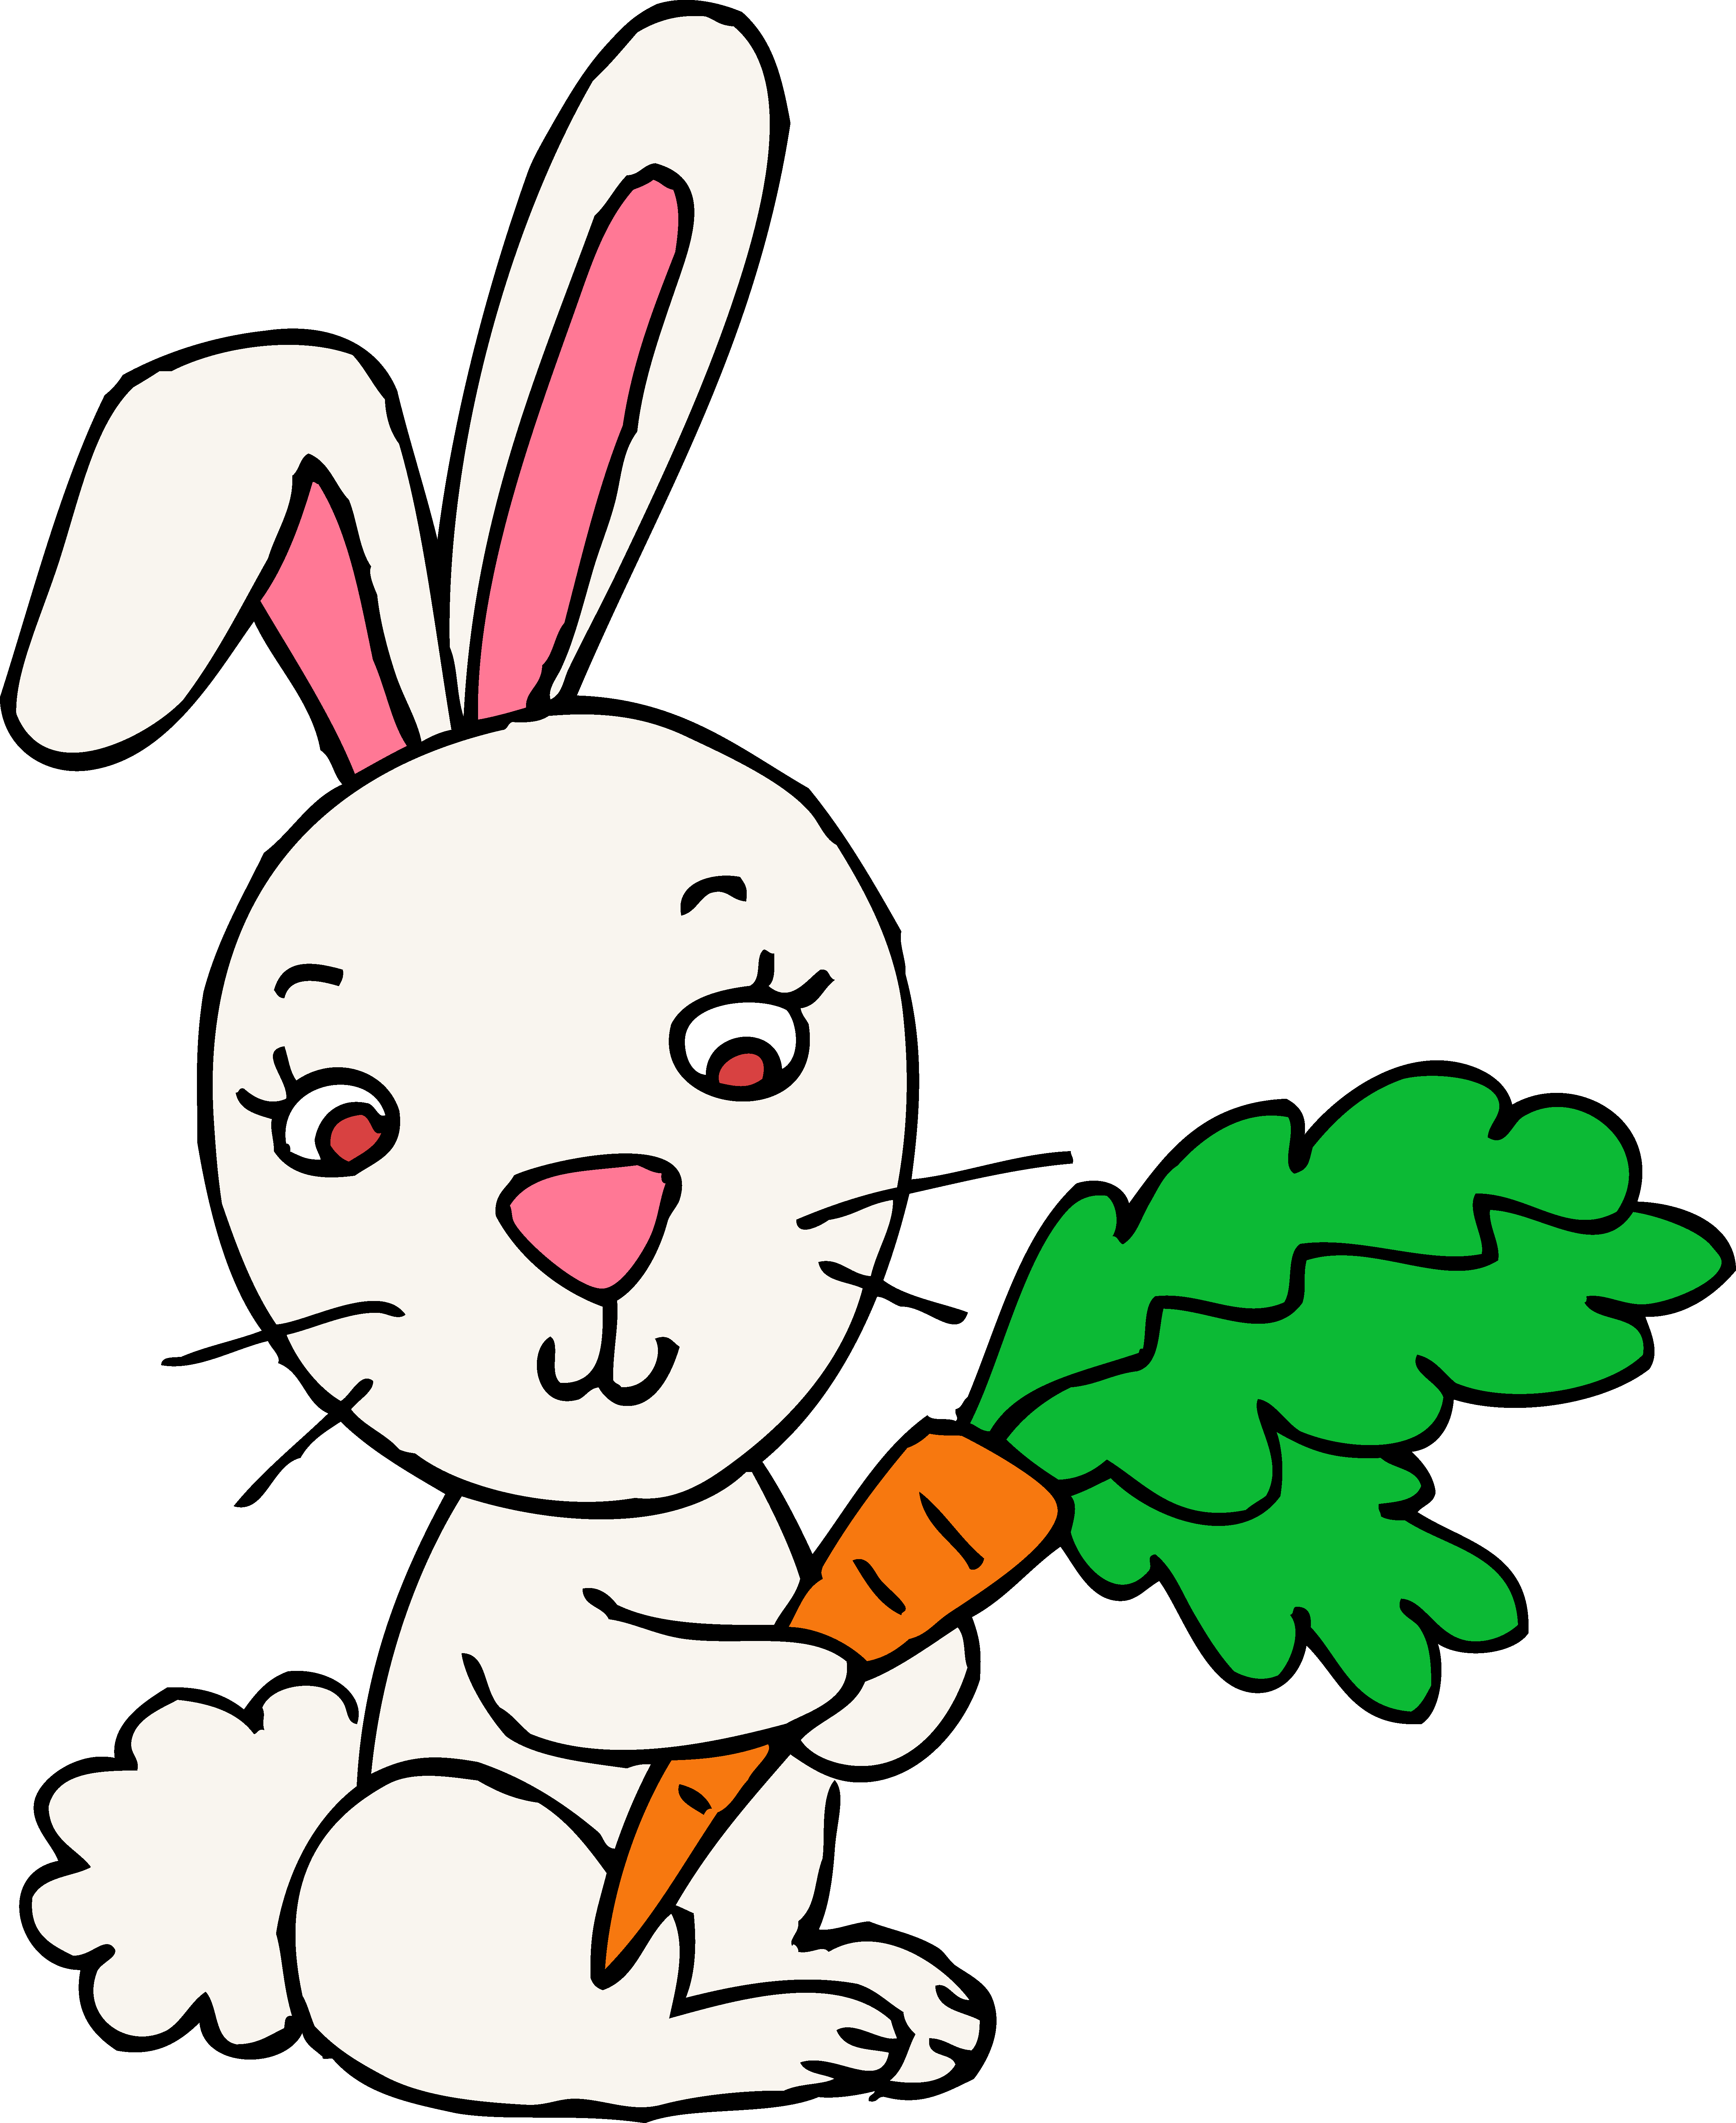 Cute Easter Bunny With Carrot - Free Clip Art